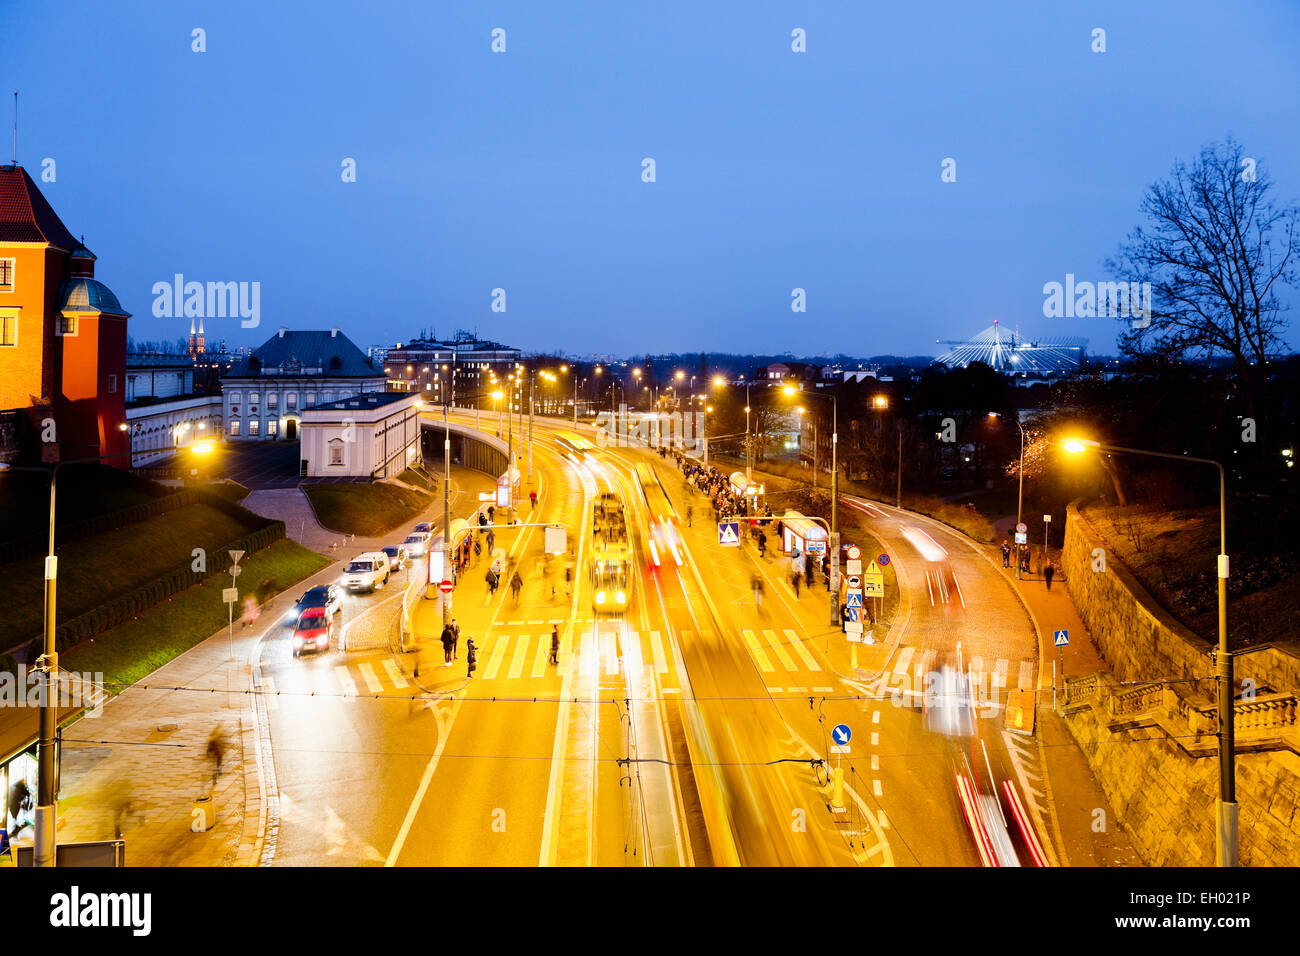 Poland, Warsaw, View on Stare Miasto, bus stop in the old town district in the evening Stock Photo